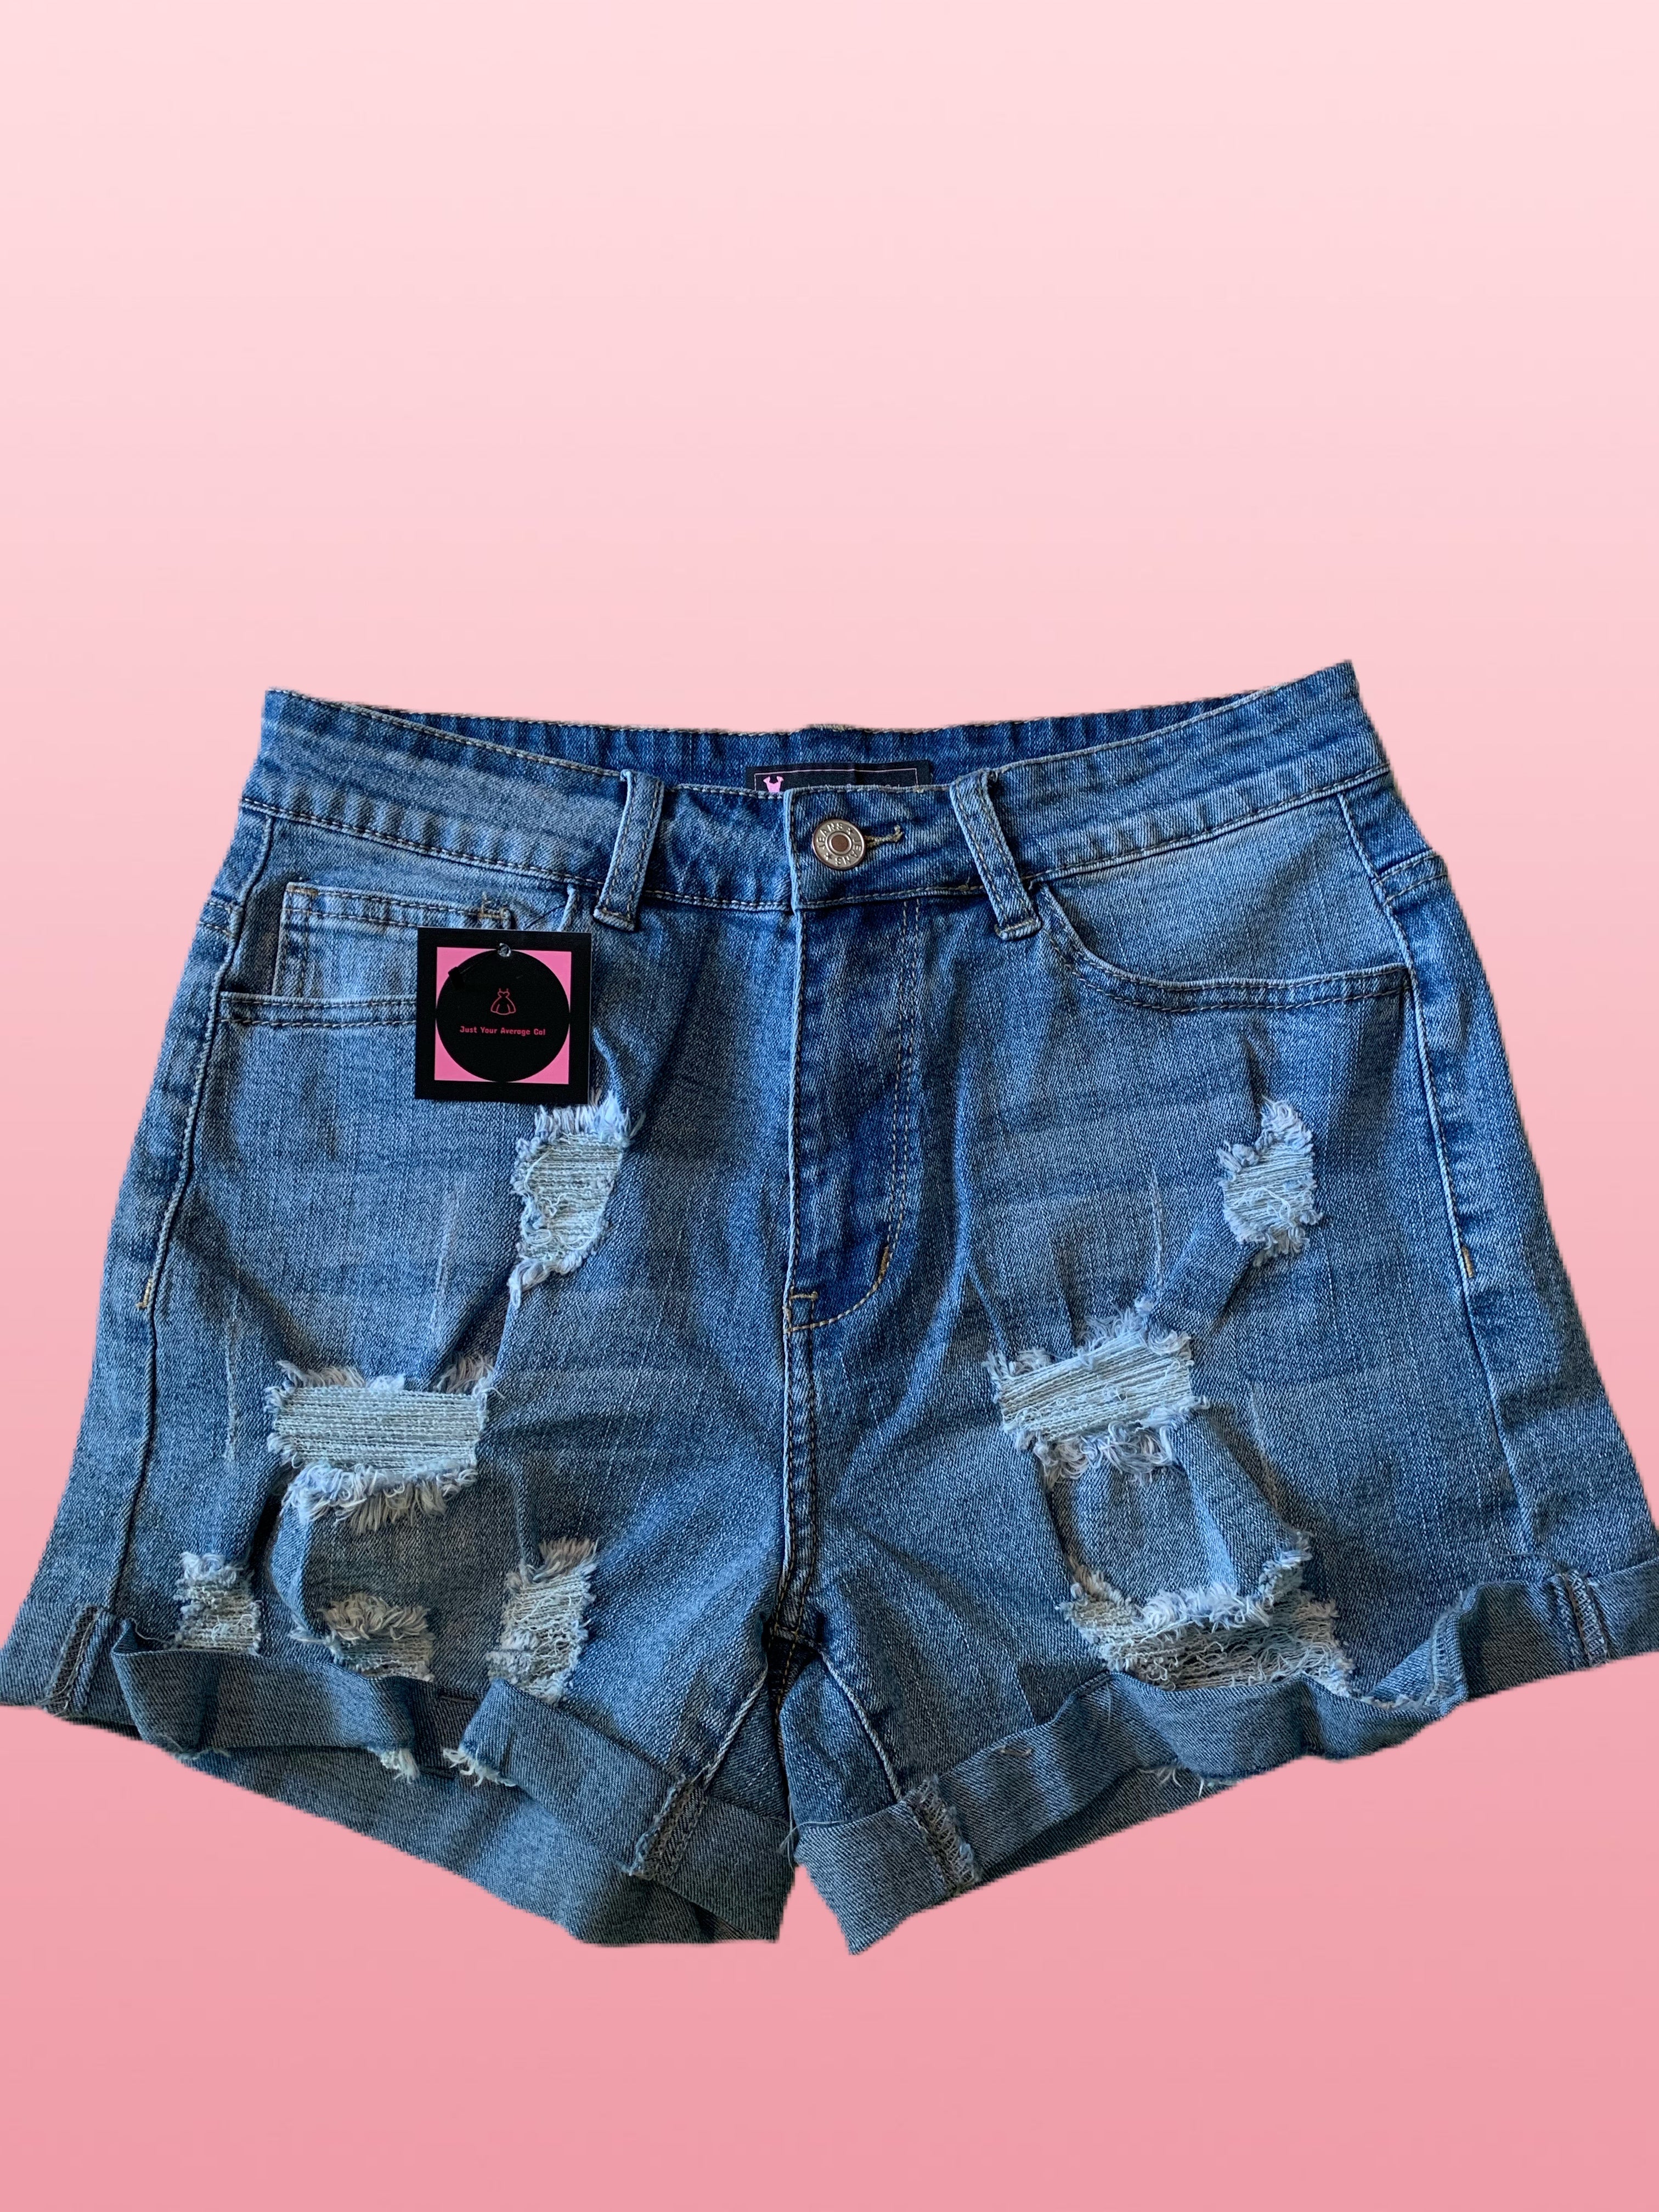 Retro distressed stretchy denim shorts. Mid-rise with rolled cuff hem, 5 pockets, and zip fly bronze button closure. Fabric 63%Cotton+35%Polyester+2%Spandex 